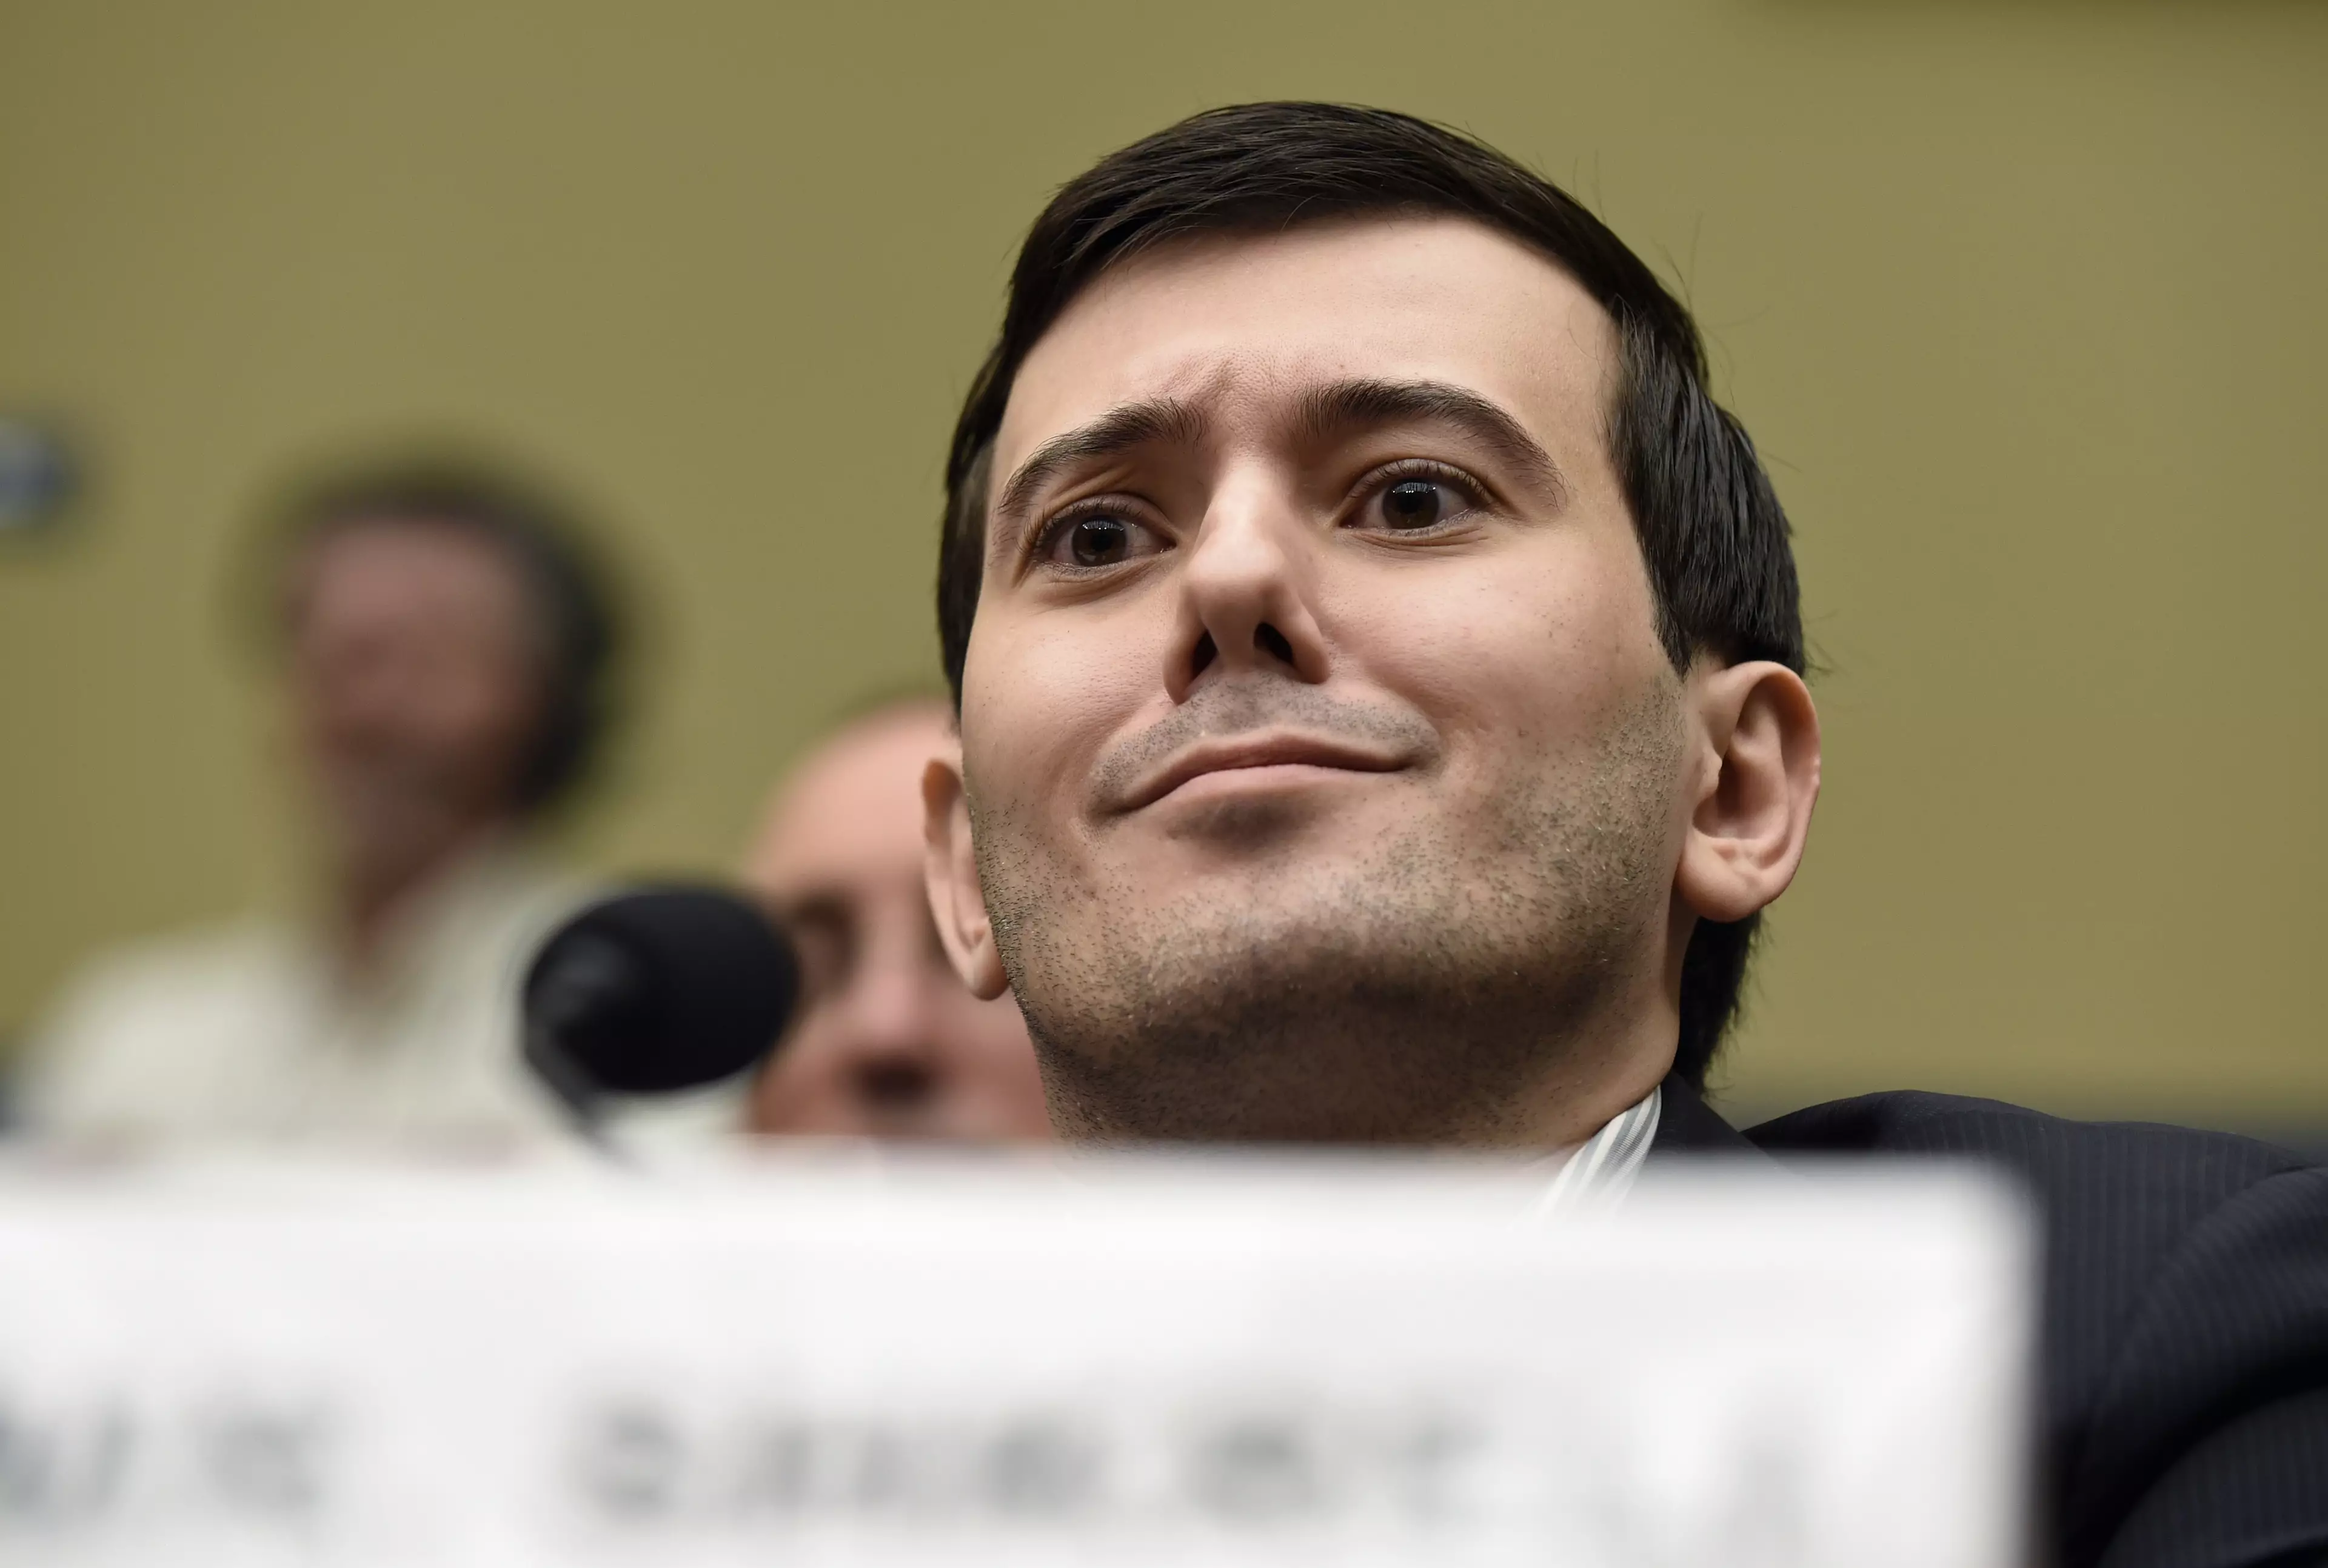 Martin Shkreli Has Responded To The Students Who Recreated His Drug For $2